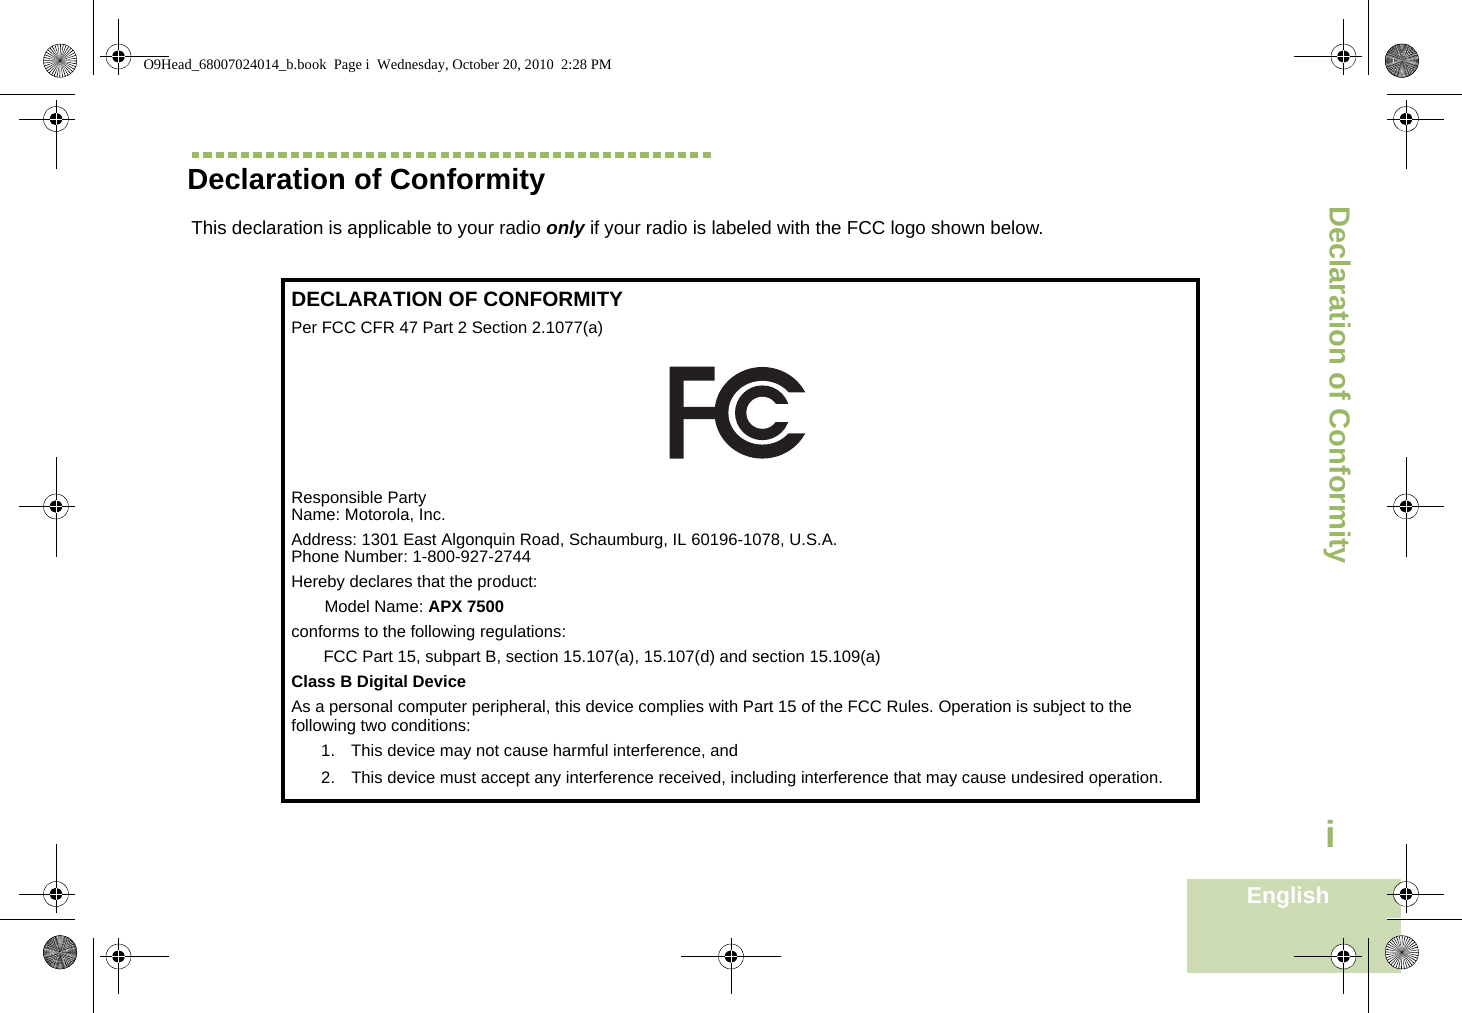 Declaration of ConformityEnglishiDeclaration of ConformityThis declaration is applicable to your radio only if your radio is labeled with the FCC logo shown below.DECLARATION OF CONFORMITYPer FCC CFR 47 Part 2 Section 2.1077(a)Responsible Party Name: Motorola, Inc.Address: 1301 East Algonquin Road, Schaumburg, IL 60196-1078, U.S.A.Phone Number: 1-800-927-2744Hereby declares that the product:Model Name: APX 7500conforms to the following regulations:FCC Part 15, subpart B, section 15.107(a), 15.107(d) and section 15.109(a)Class B Digital DeviceAs a personal computer peripheral, this device complies with Part 15 of the FCC Rules. Operation is subject to the following two conditions:1. This device may not cause harmful interference, and 2. This device must accept any interference received, including interference that may cause undesired operation.O9Head_68007024014_b.book  Page i  Wednesday, October 20, 2010  2:28 PM